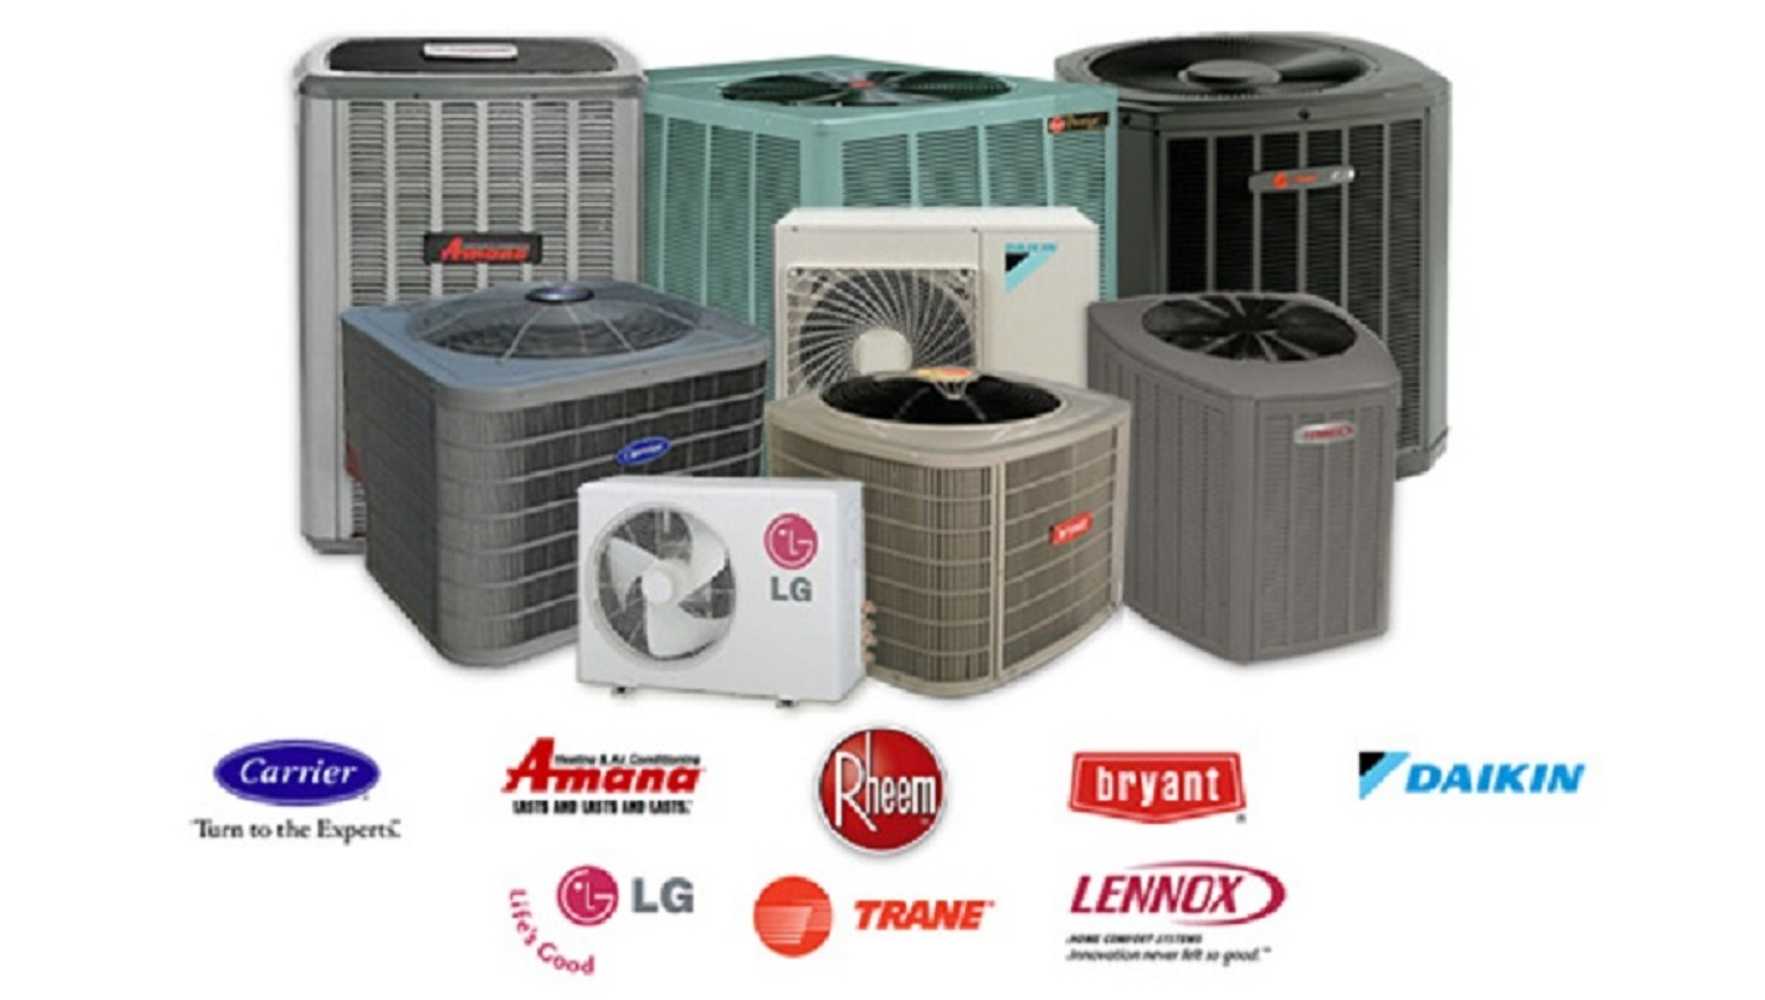 Photos from A/C Xperts